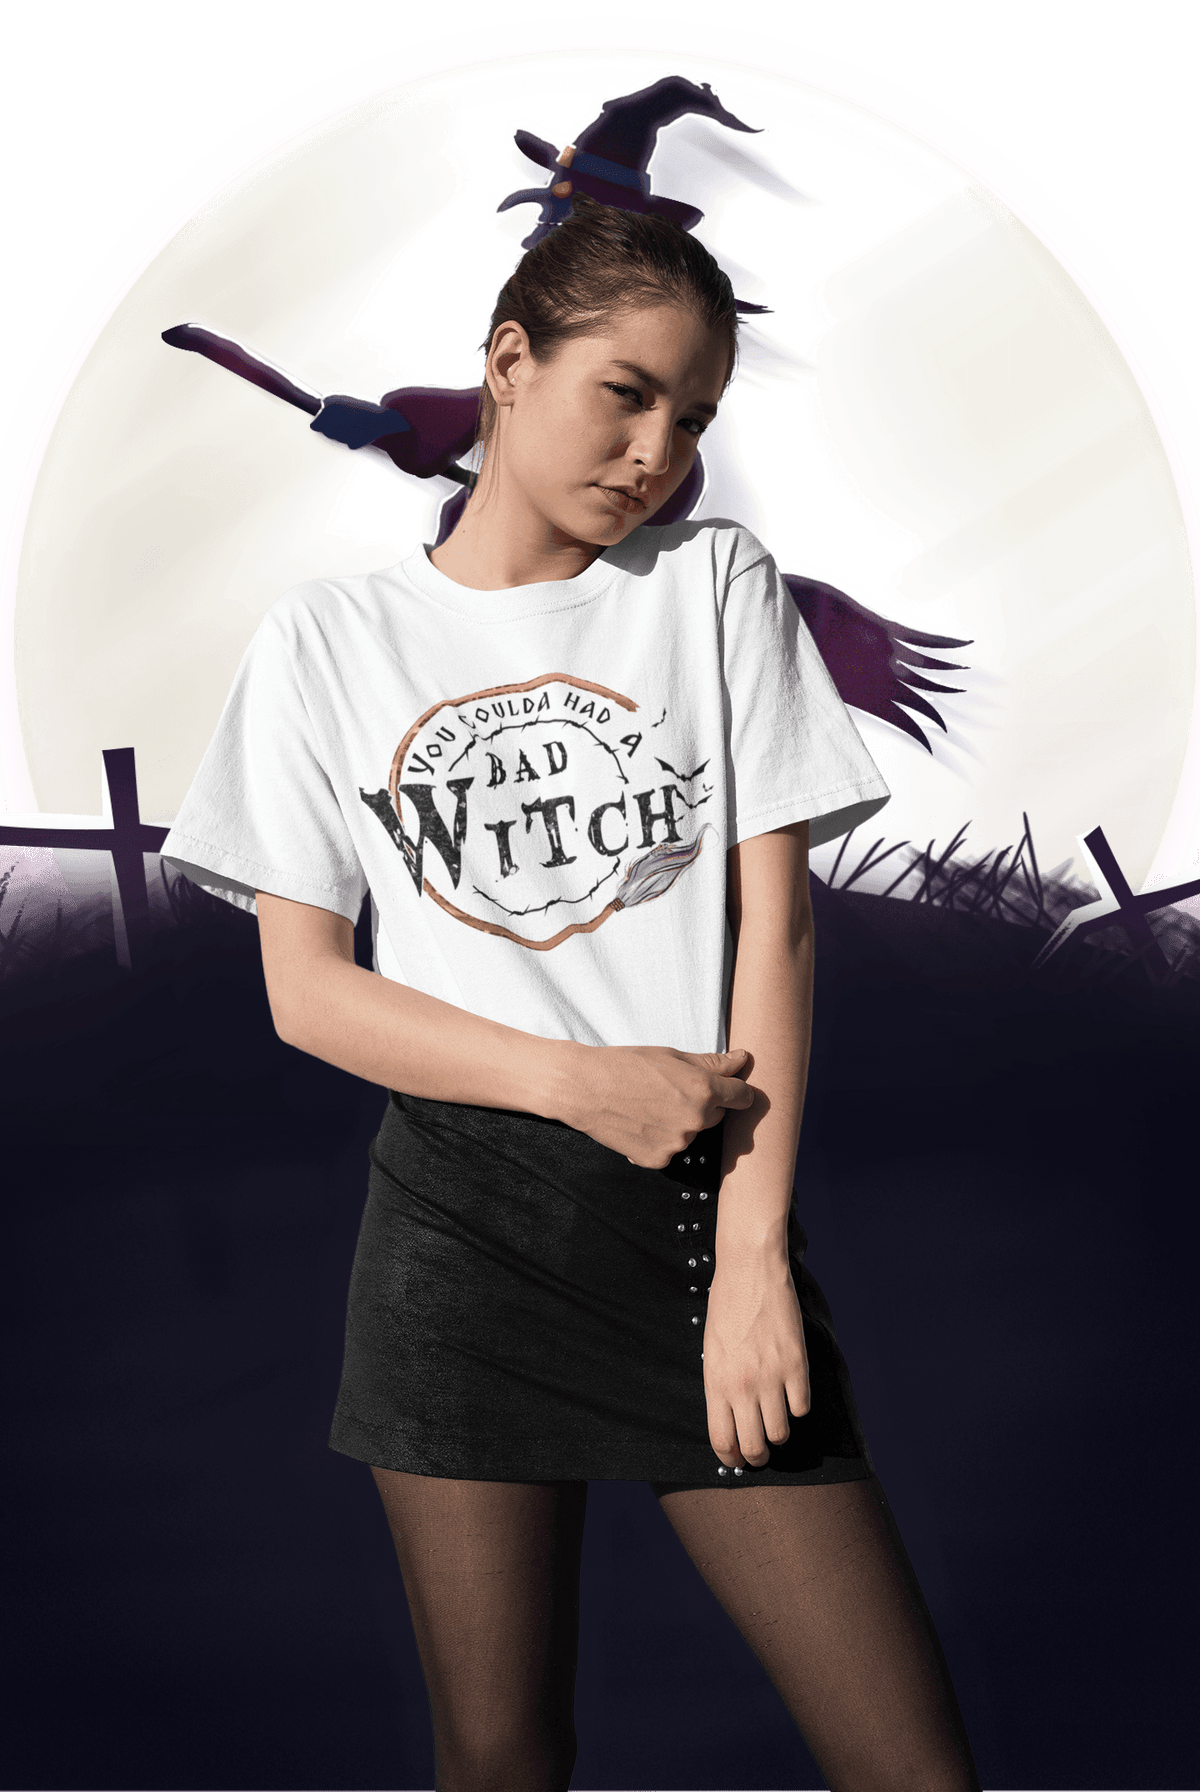 YOU COULDA HAD A BAD WITCH T-shirt-Regular Fit Tee-StylinArts